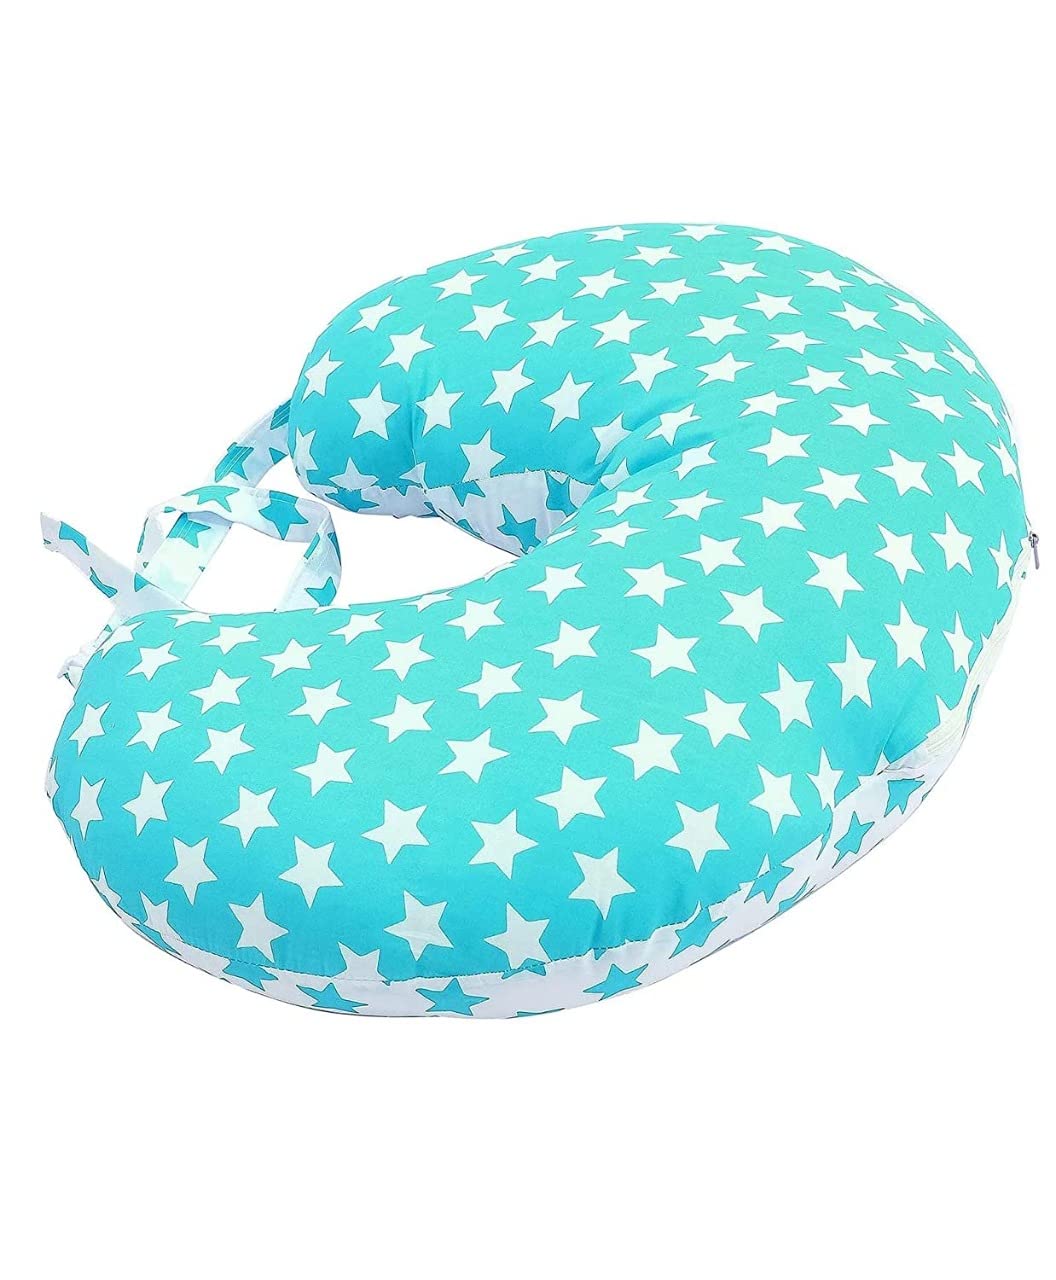 Portable Baby Breast Feeding Pillow for New Born Baby | Infant Baby Nursing Feeding Pillow for Breastfeeding with Removable Cover, Cotton Pillow | Feeding Pillow for New Born Baby